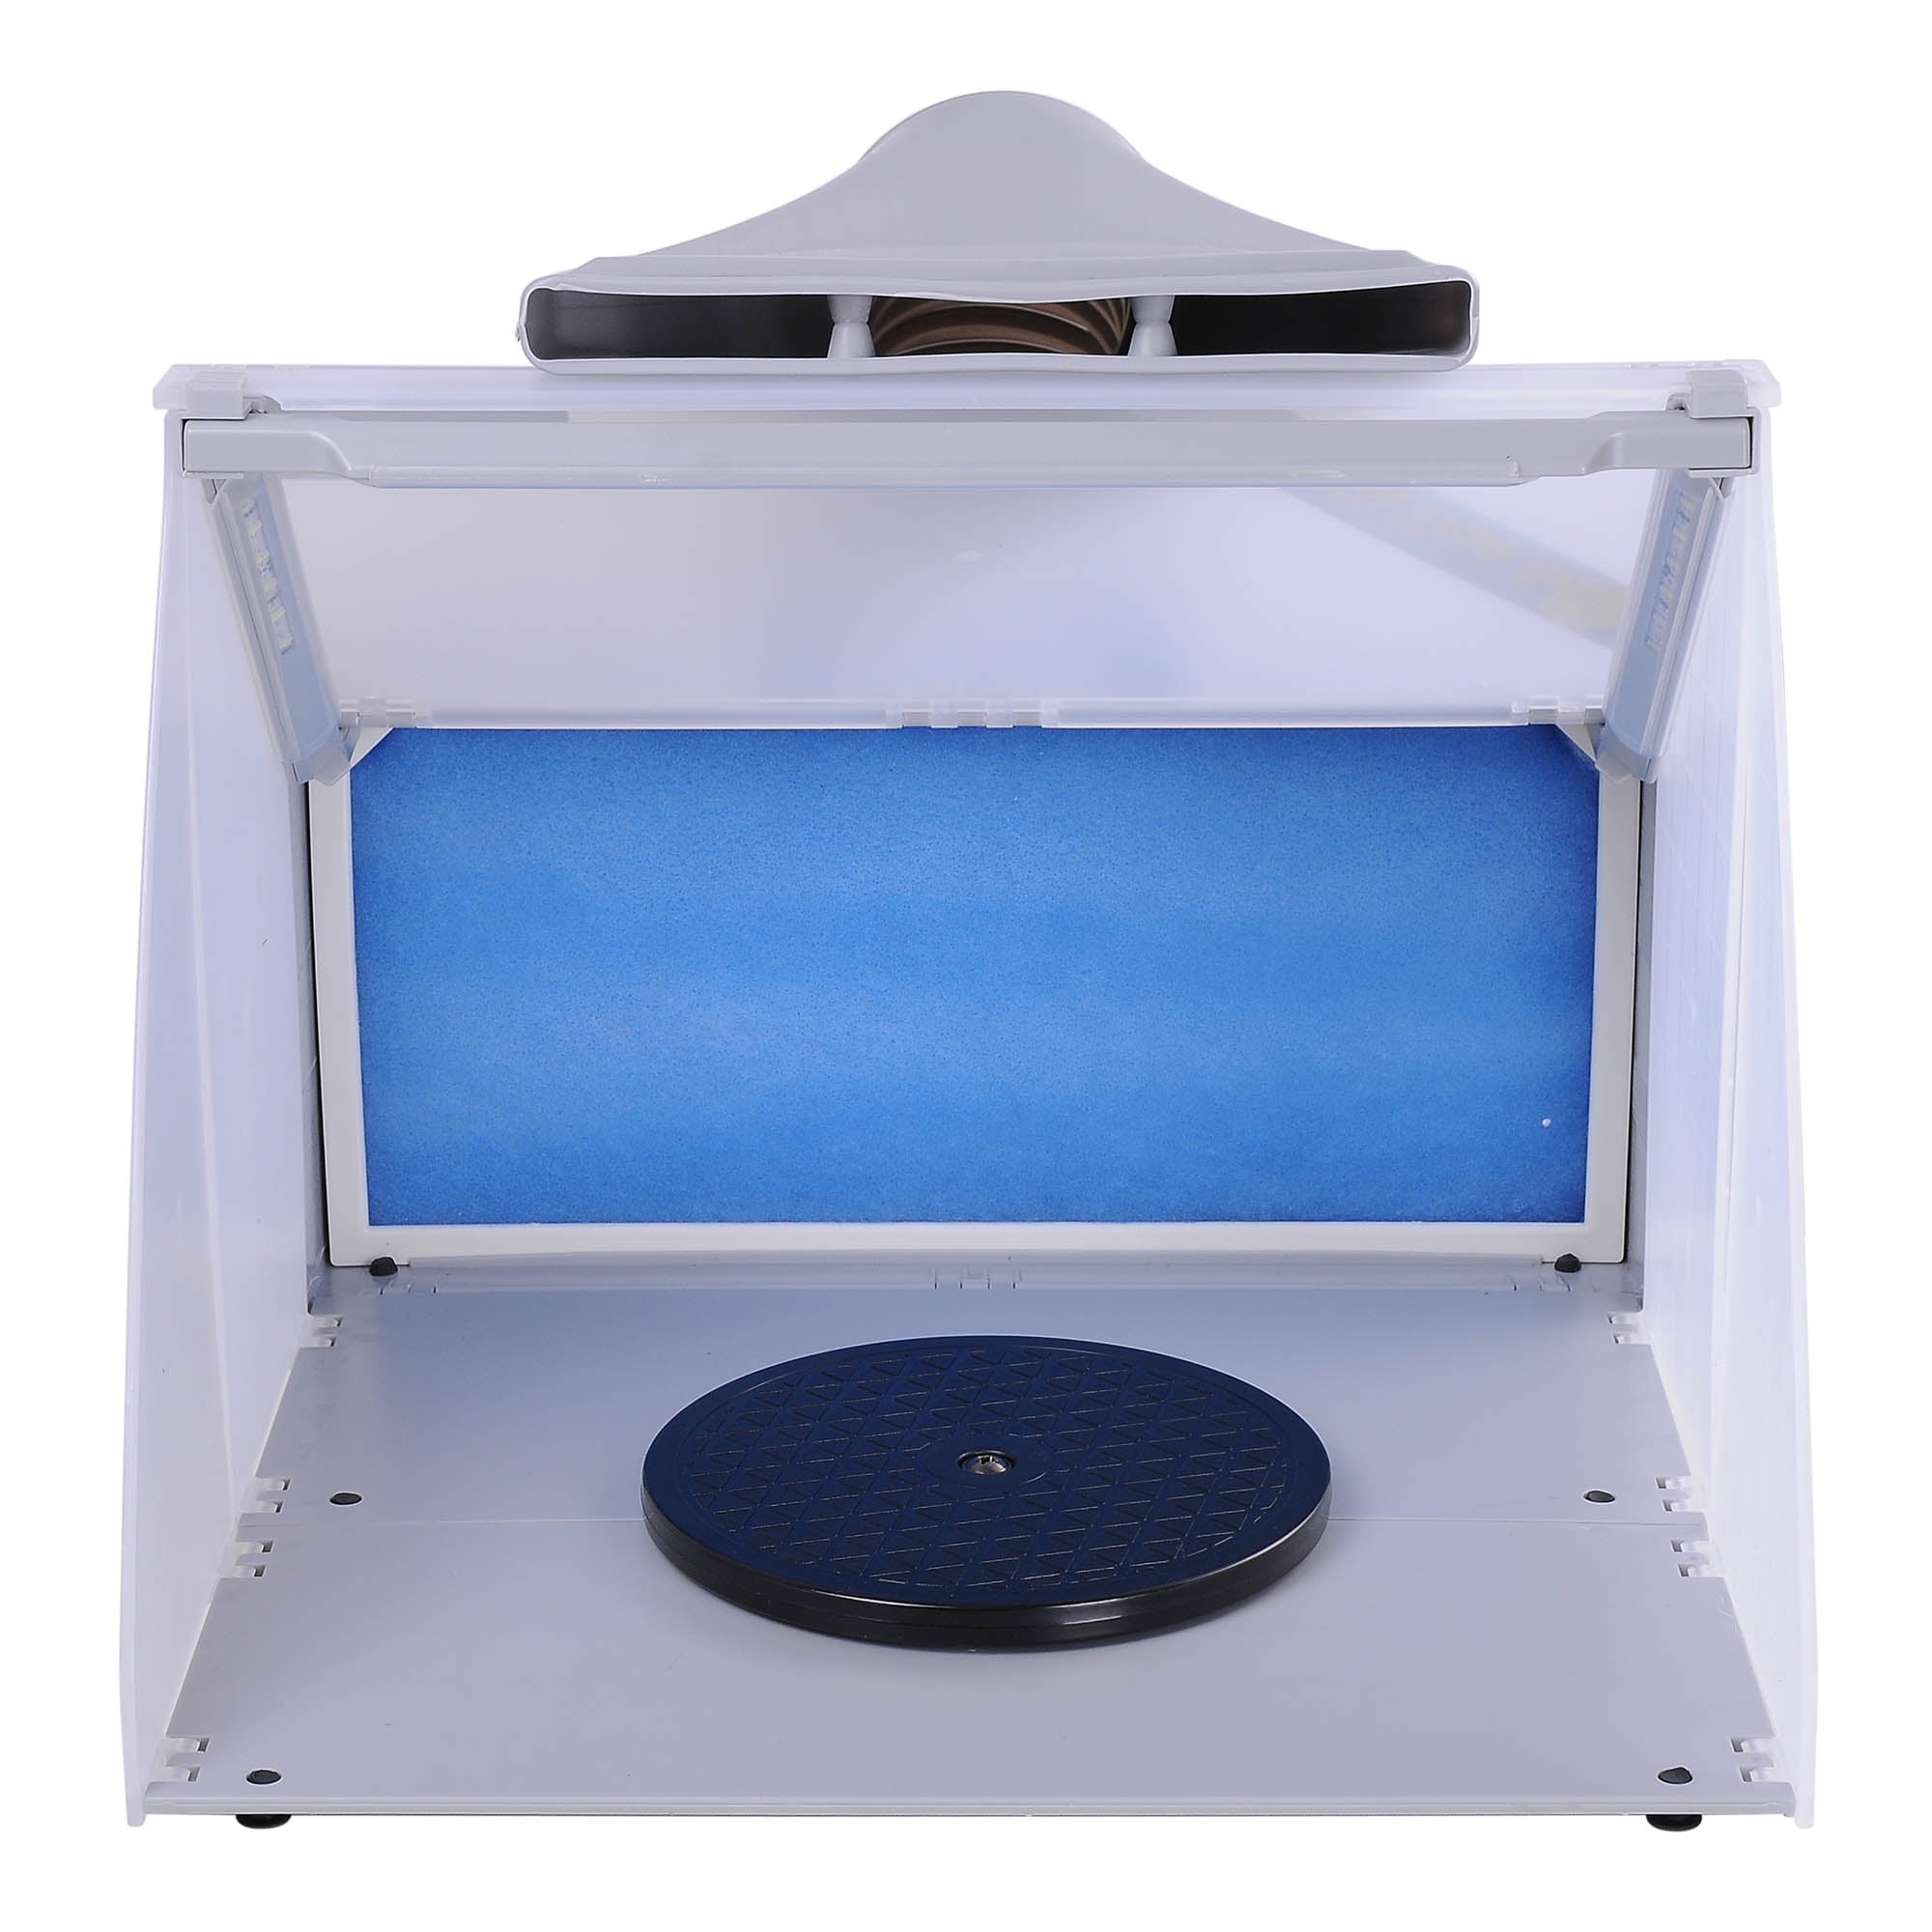 Bulldog Liquidators Valencia on Instagram: Airbrush Spray Booth with  Exhaust Fan - Portable Airbrush Paint Booth with Filter LED Lights, Air  Brush Kit for Model Painting, Hobby Painting, Crafts, Cake, T-Shirt DIY